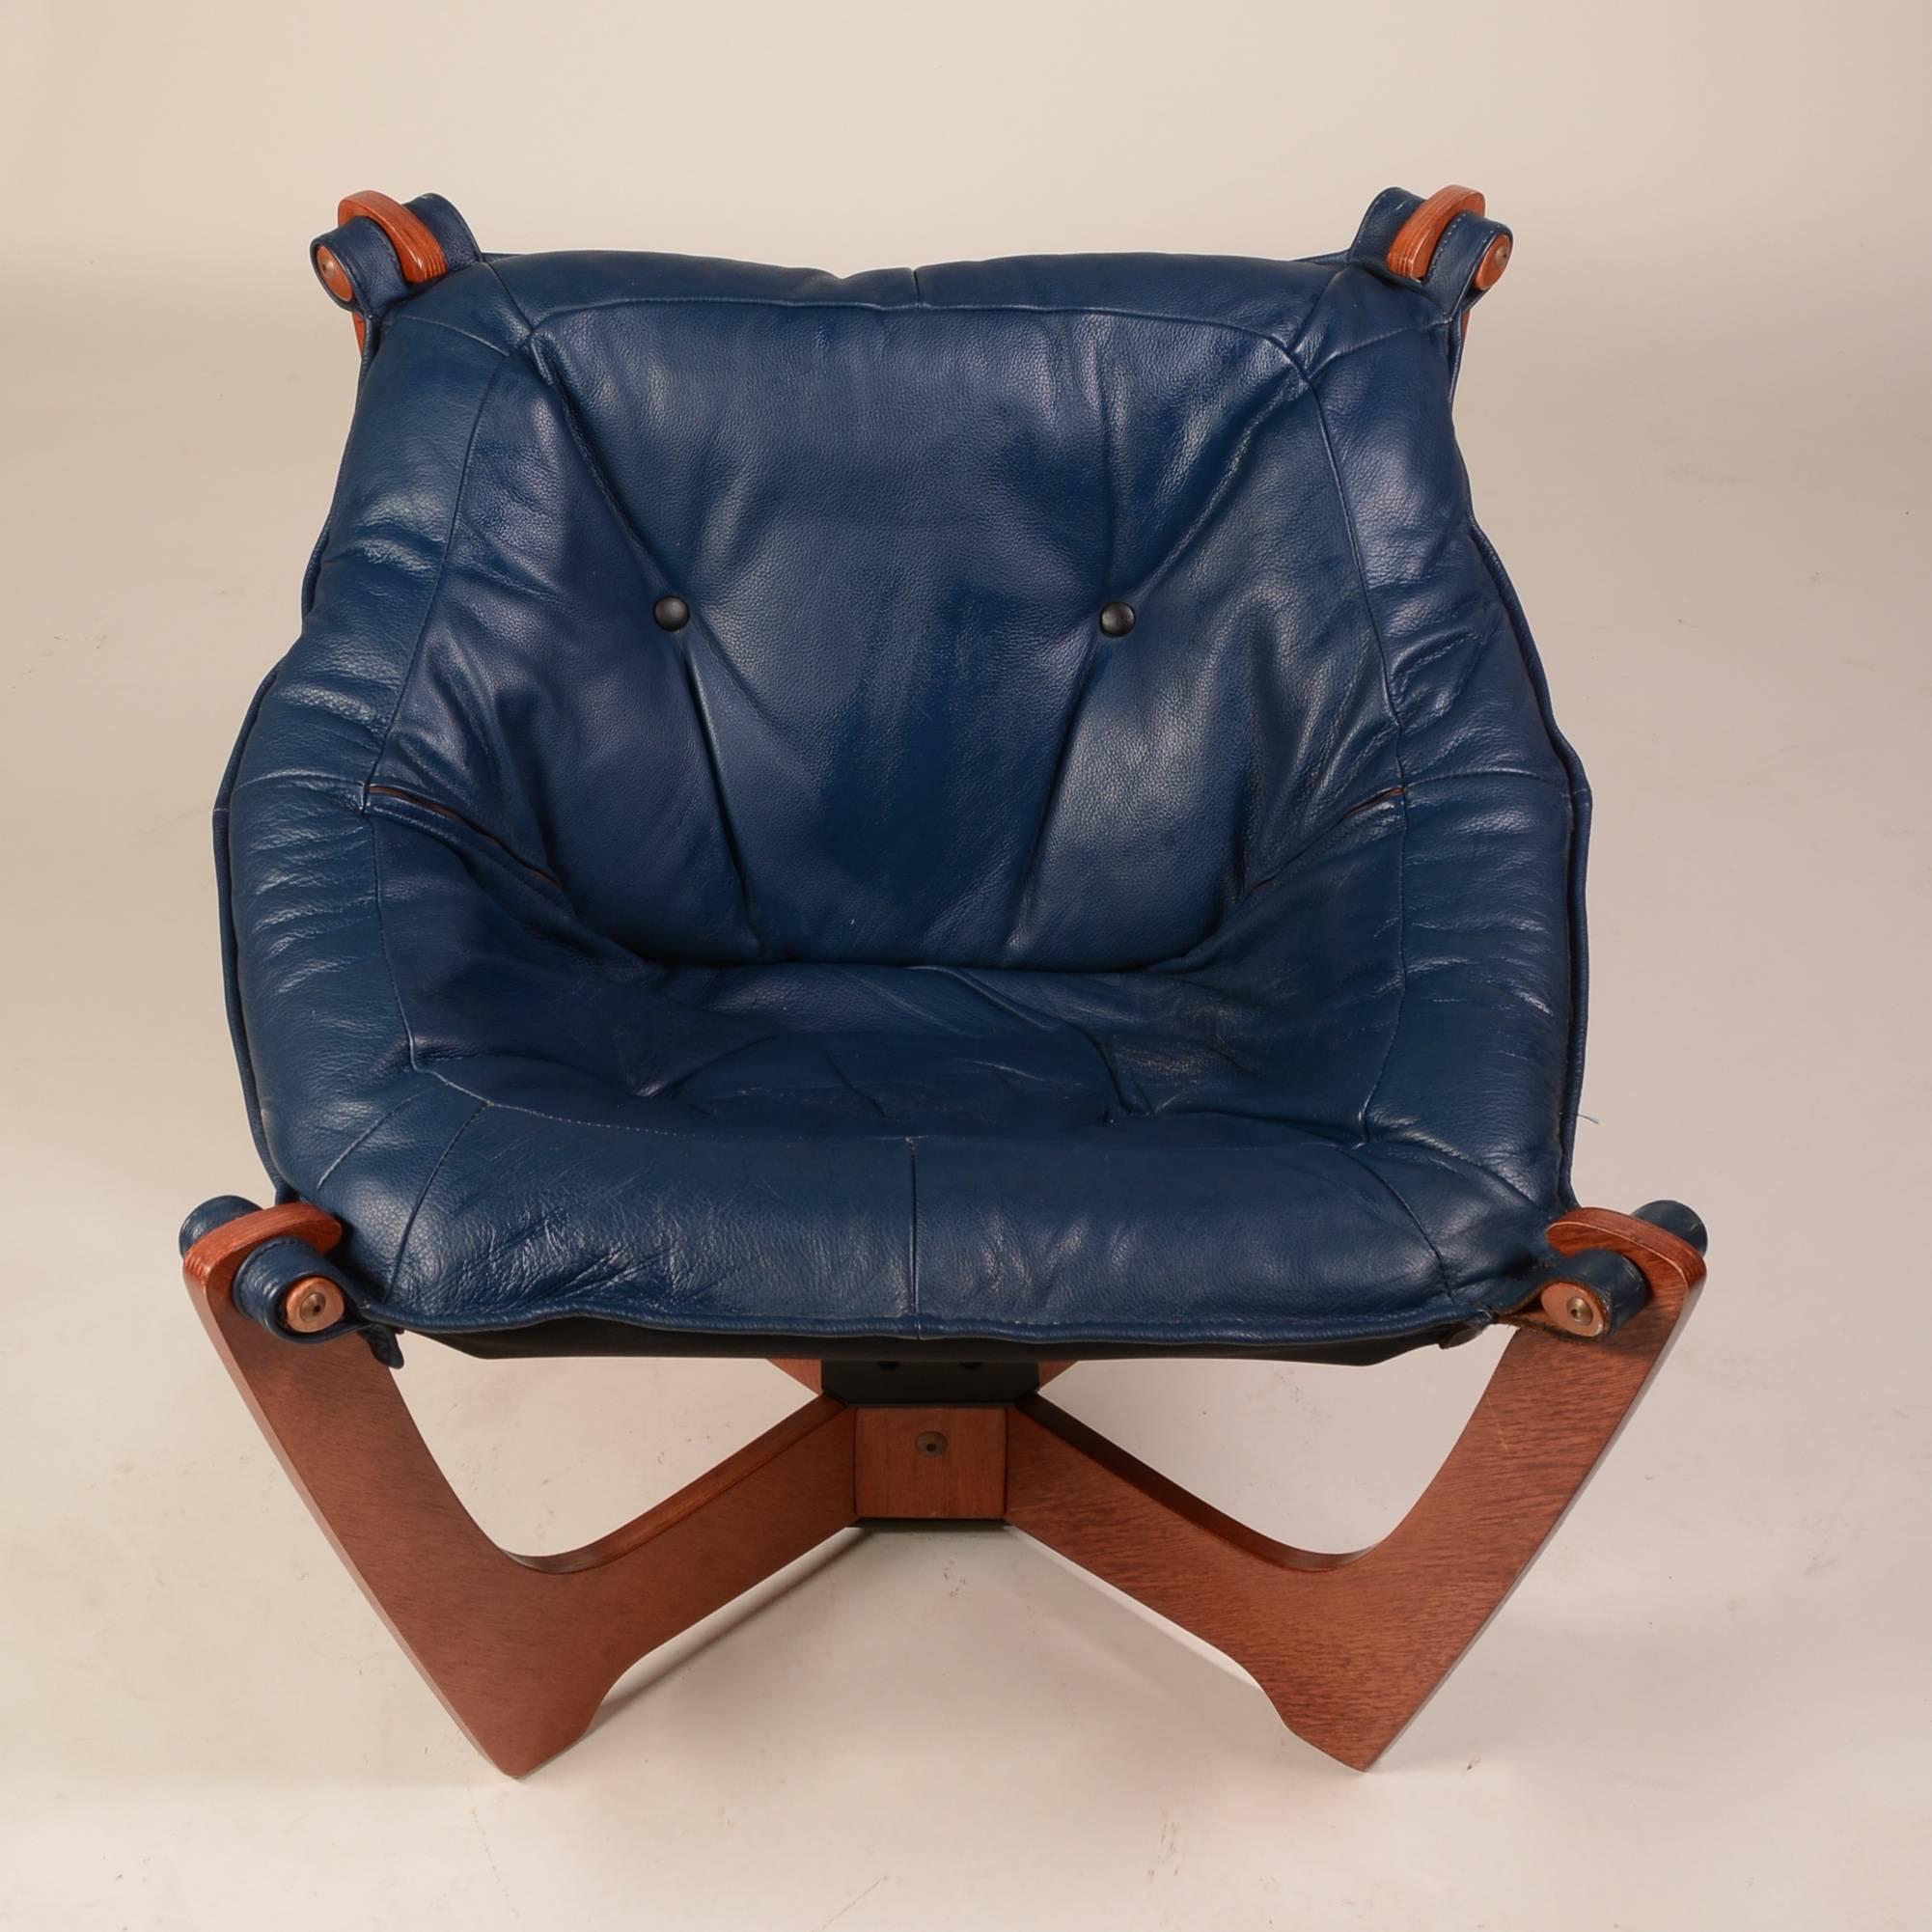 A vintage Luna chair designed by Odd Knutsen, made in Norway.